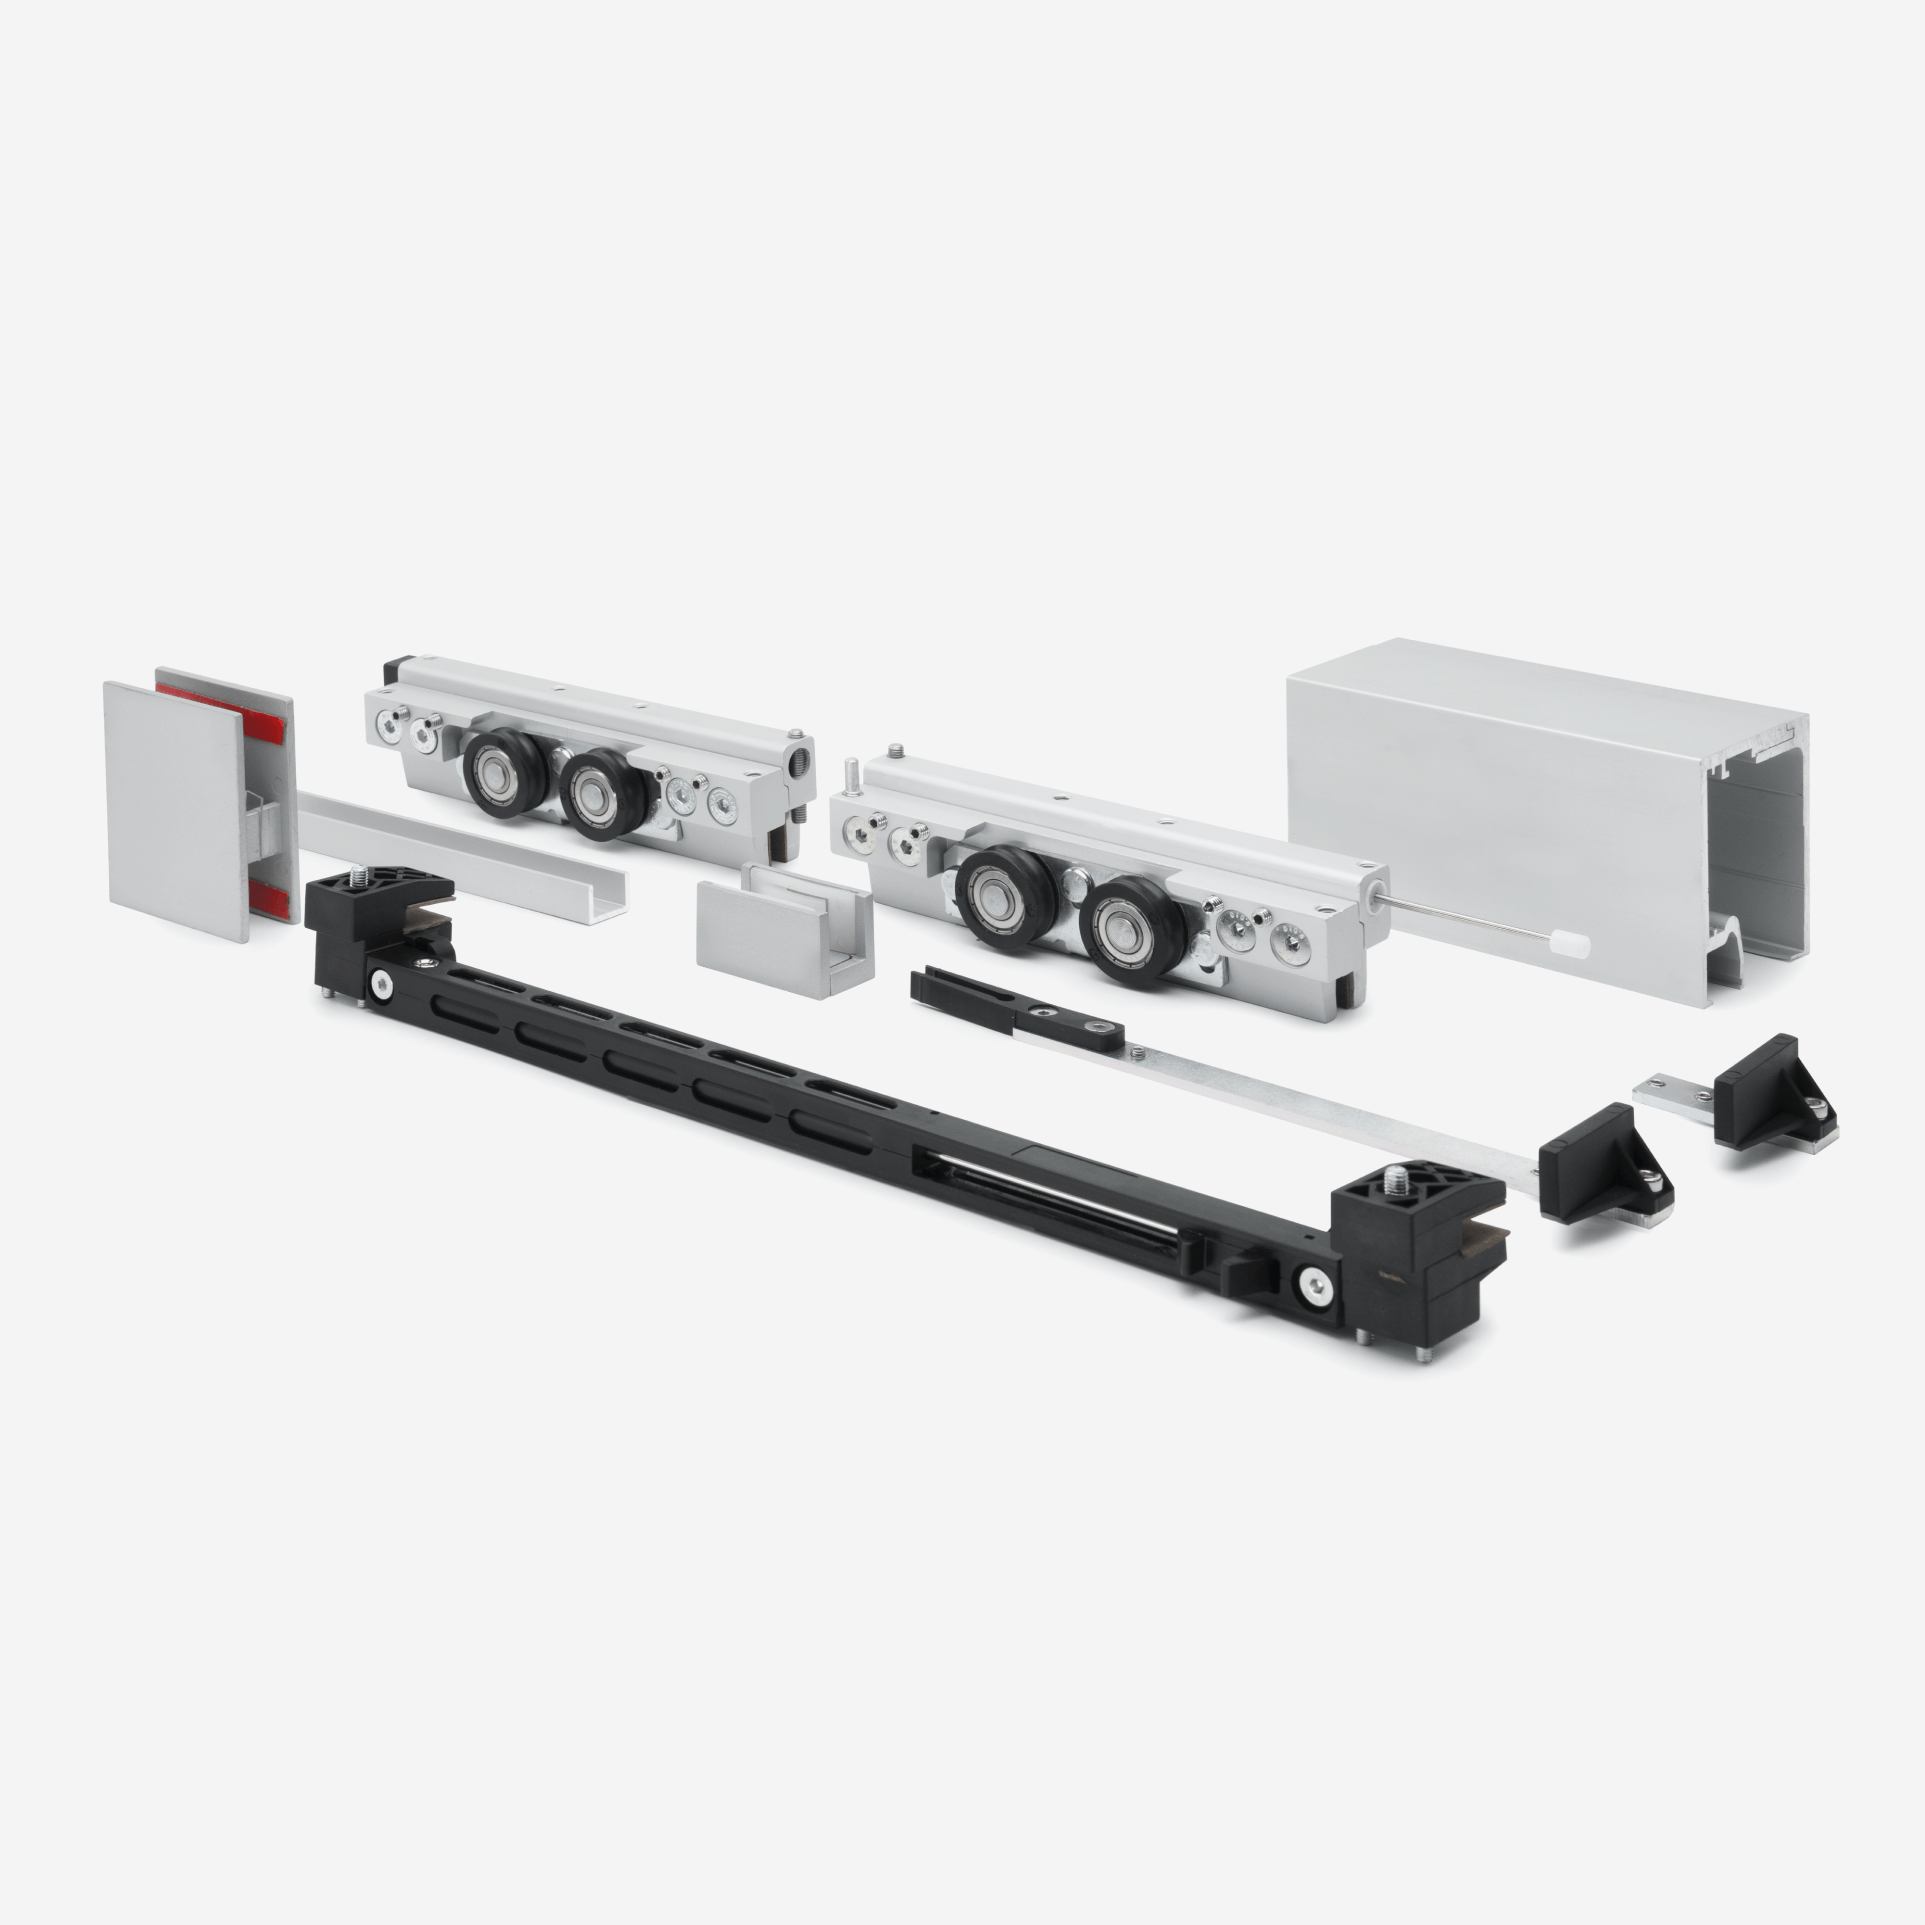 CGS-200 Wall or Ceiling Mount Sliding Door and Fixed Panel Kit with Soft Close Braking System and 157" Track